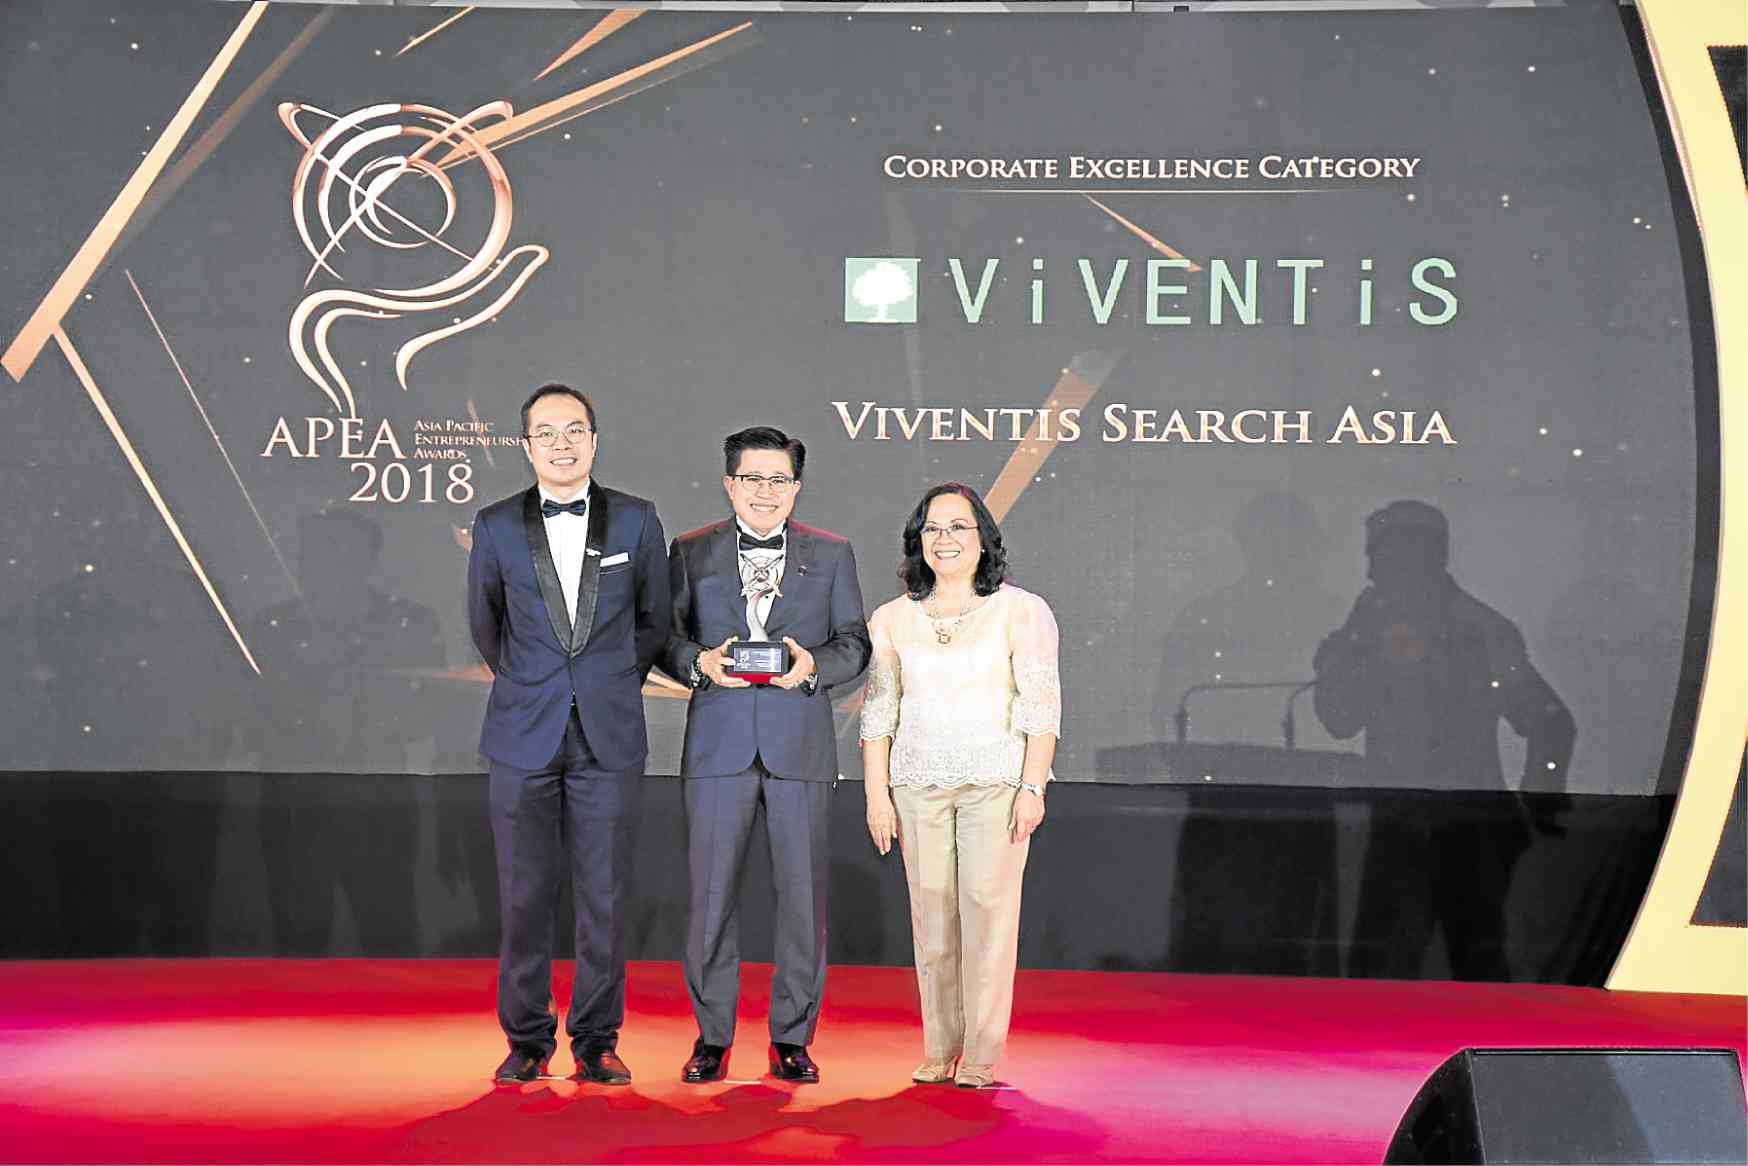 Viventis executive director Yu Ming Ching receives the Award for Corporate Excellence from Enterprise Asia president Dato’ William Ng and Trade Undersecretary Zenaida Cuison Maglaya